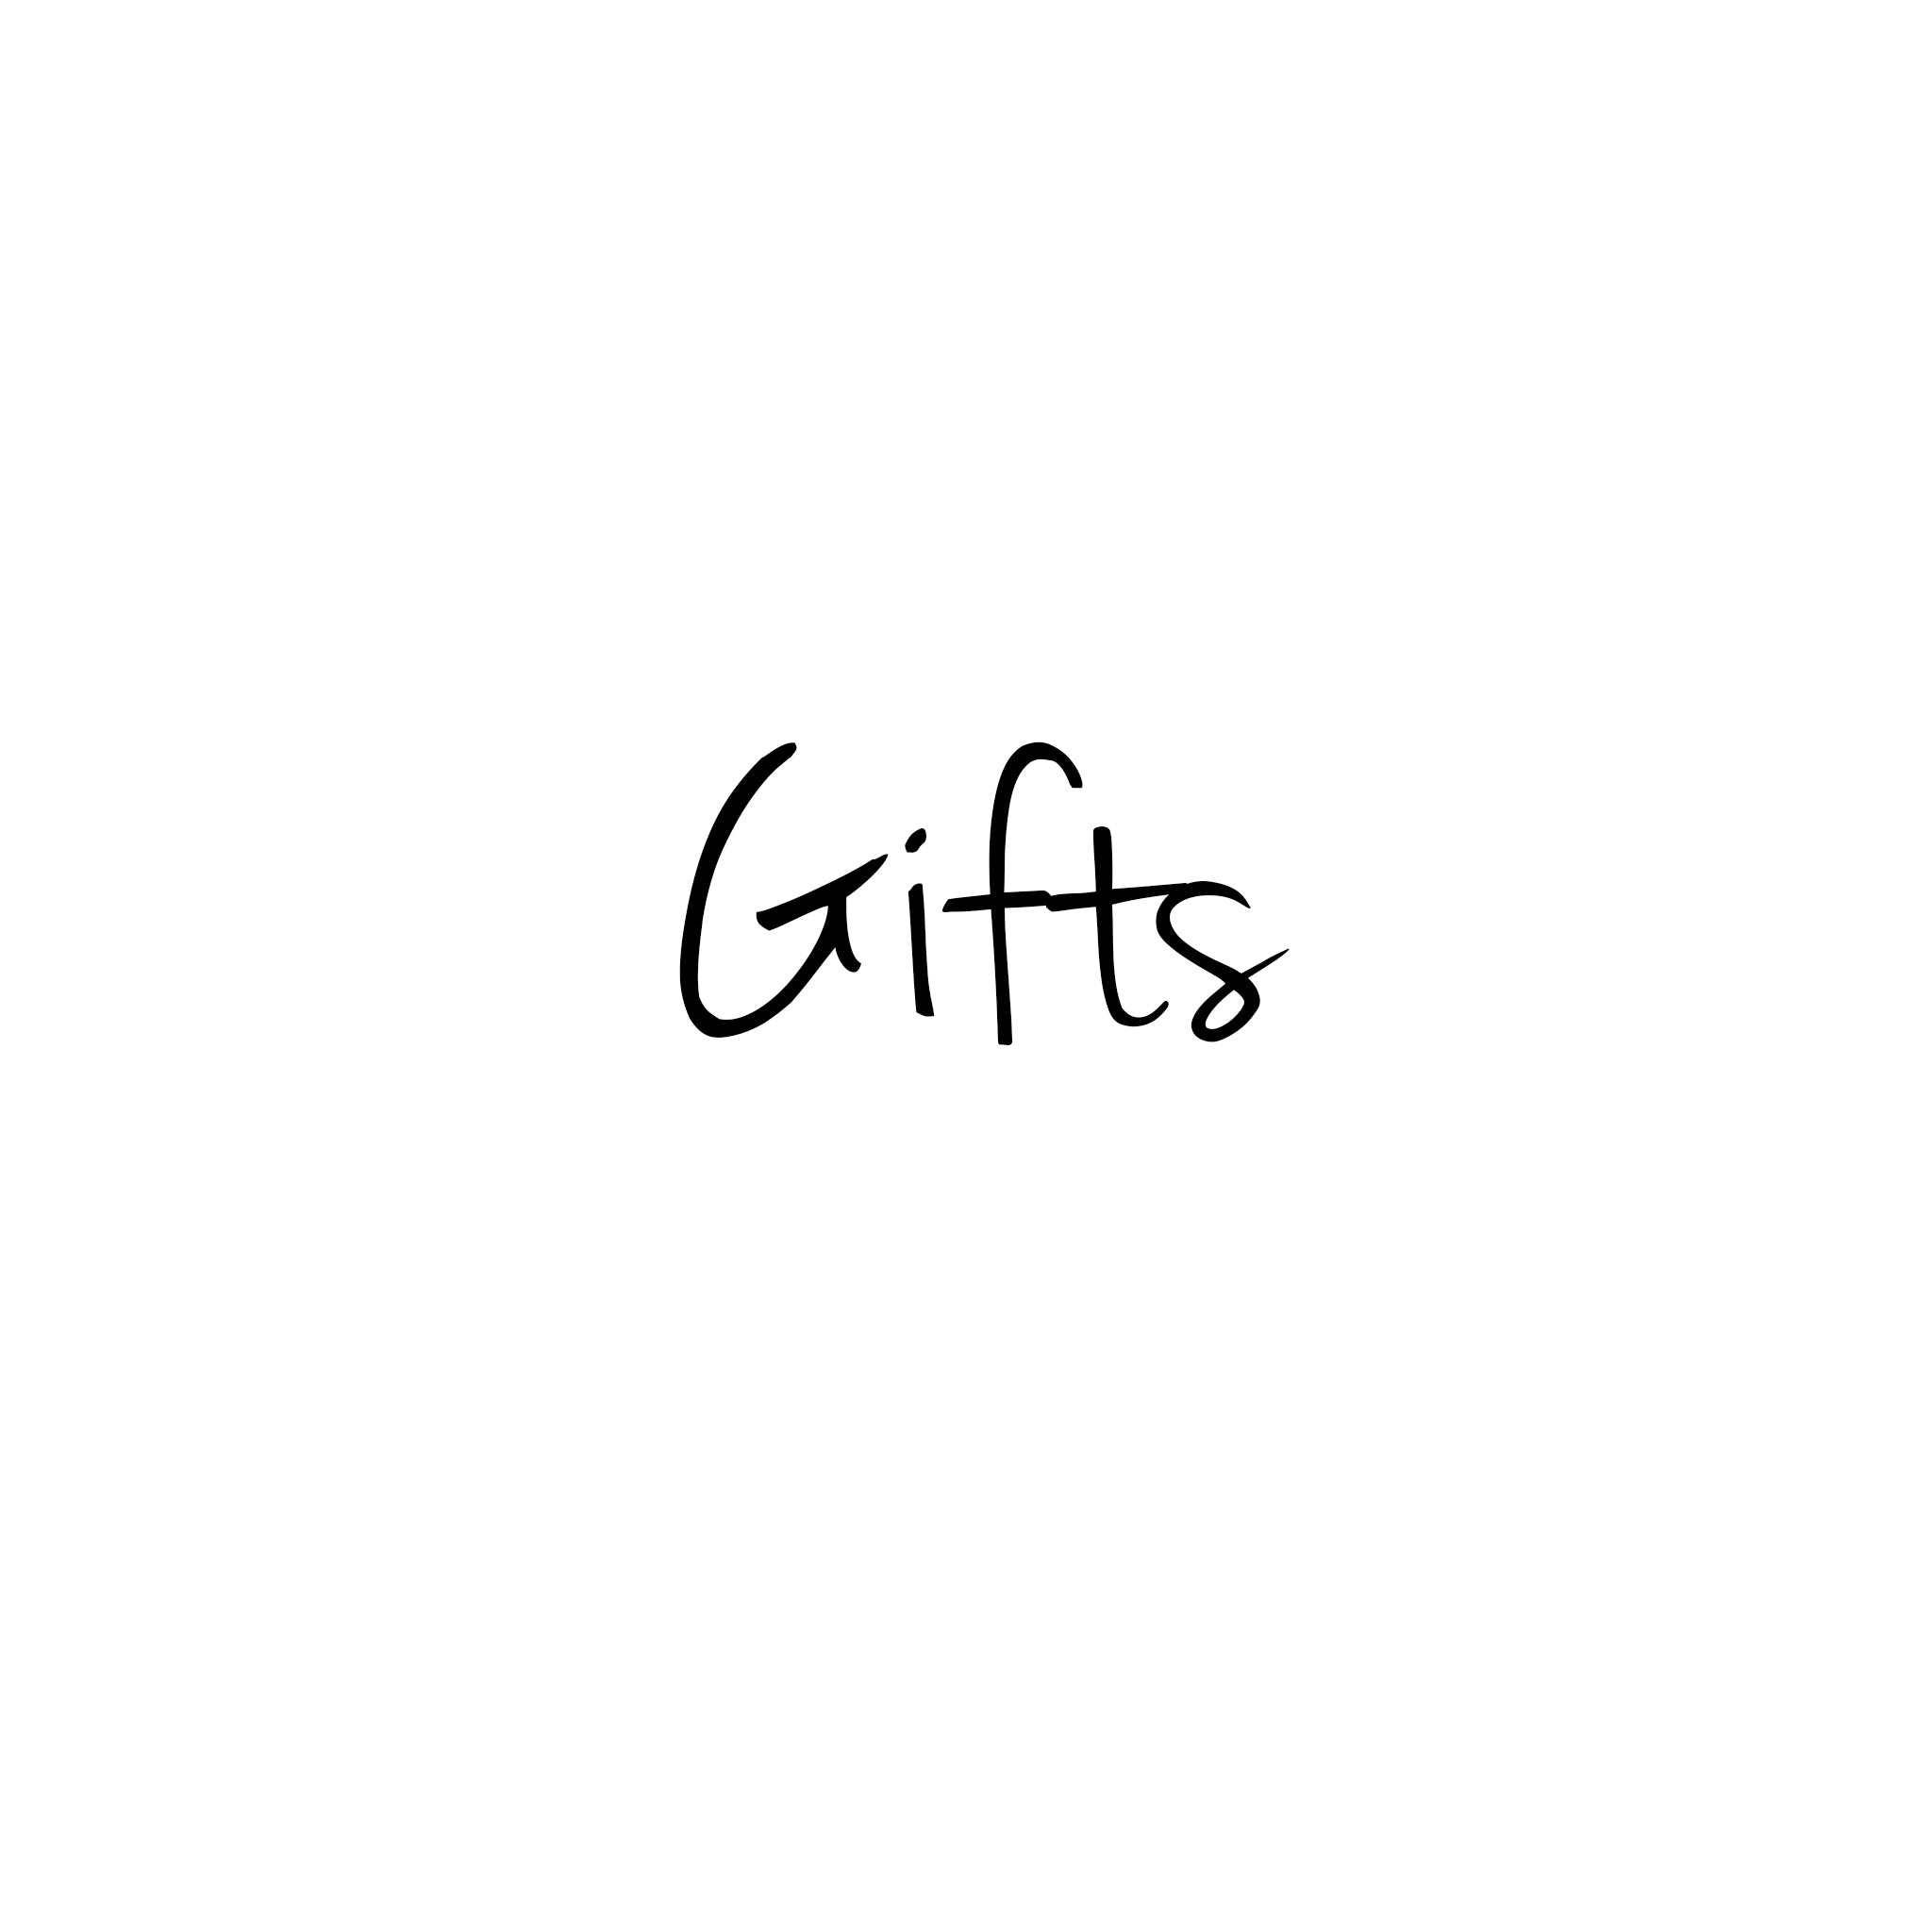 GIFTS